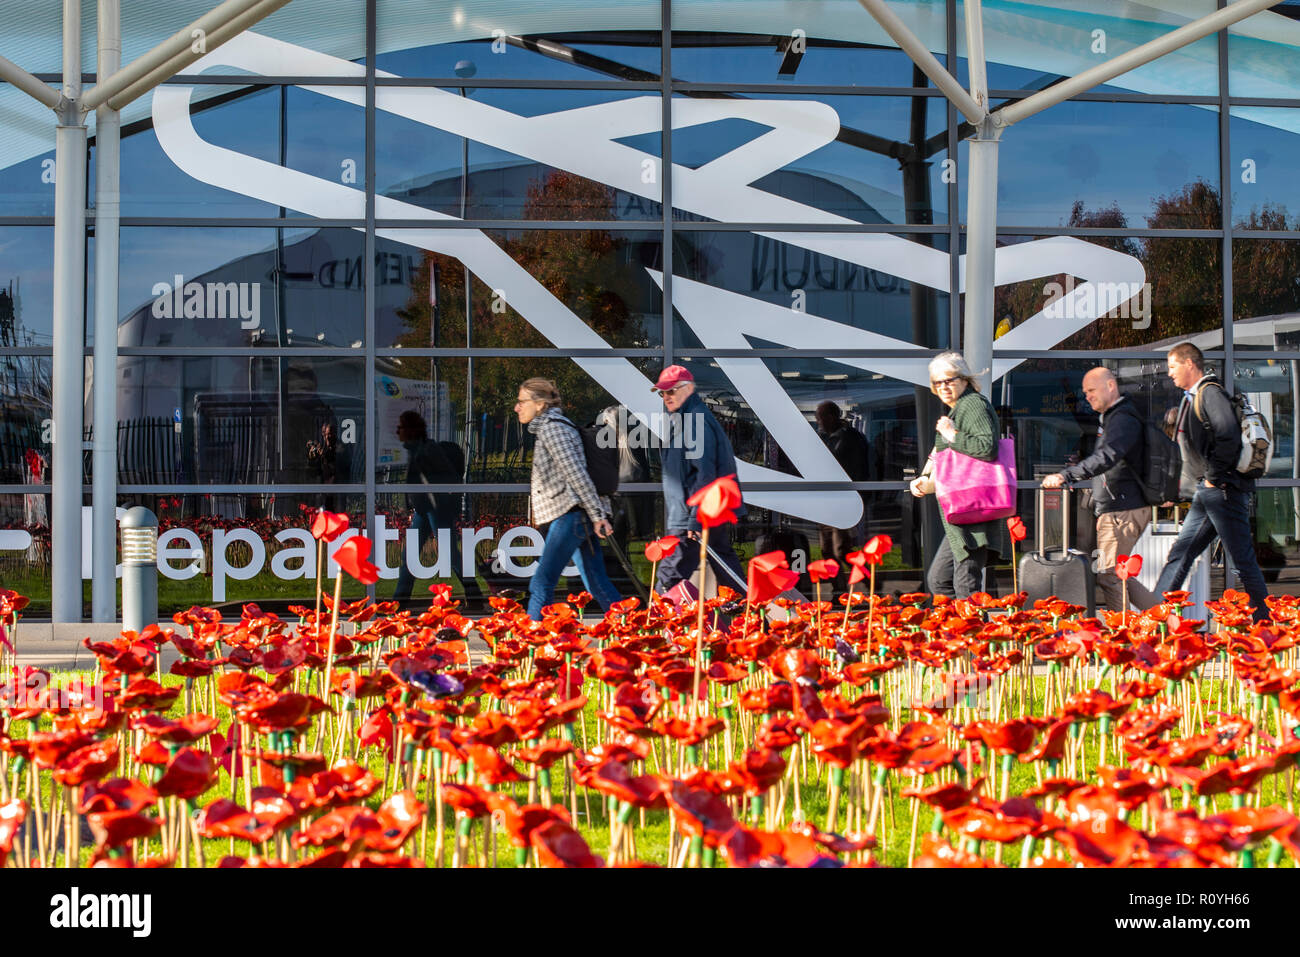 London Southend Airport, Essex, UK. To mark the centenary of the end of World War One a commemorative garden has been opened outside the terminal at London Southend Airport consisting of 2000 red ceramic poppies made by hundreds of children from 25 Southend schools. The airport served as RAF Rochford during both World Wars. Holiday passengers head towards departures passing the poppies Stock Photo